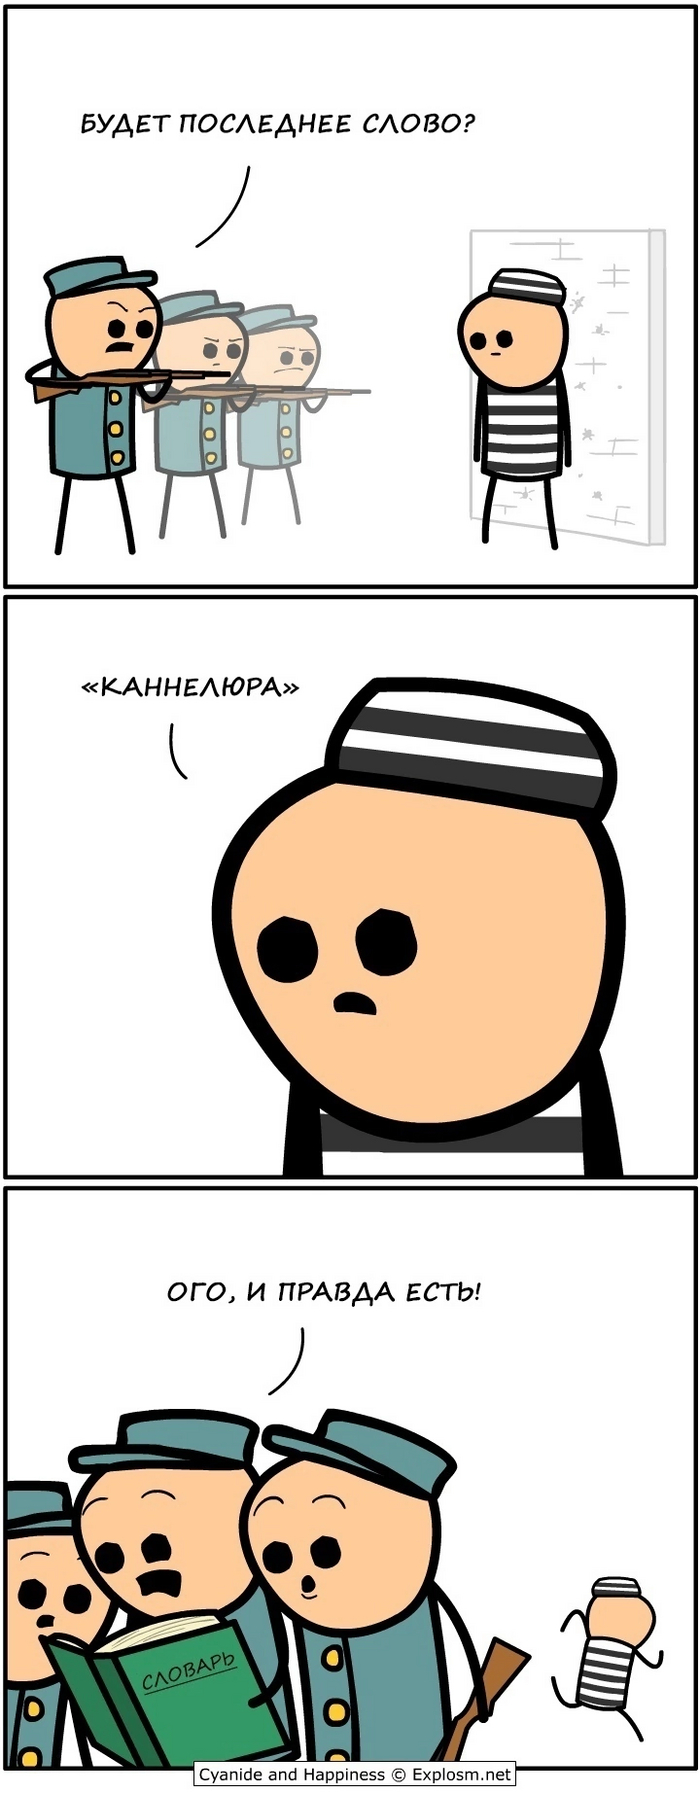  Cyanide and Happiness, , ,   , 